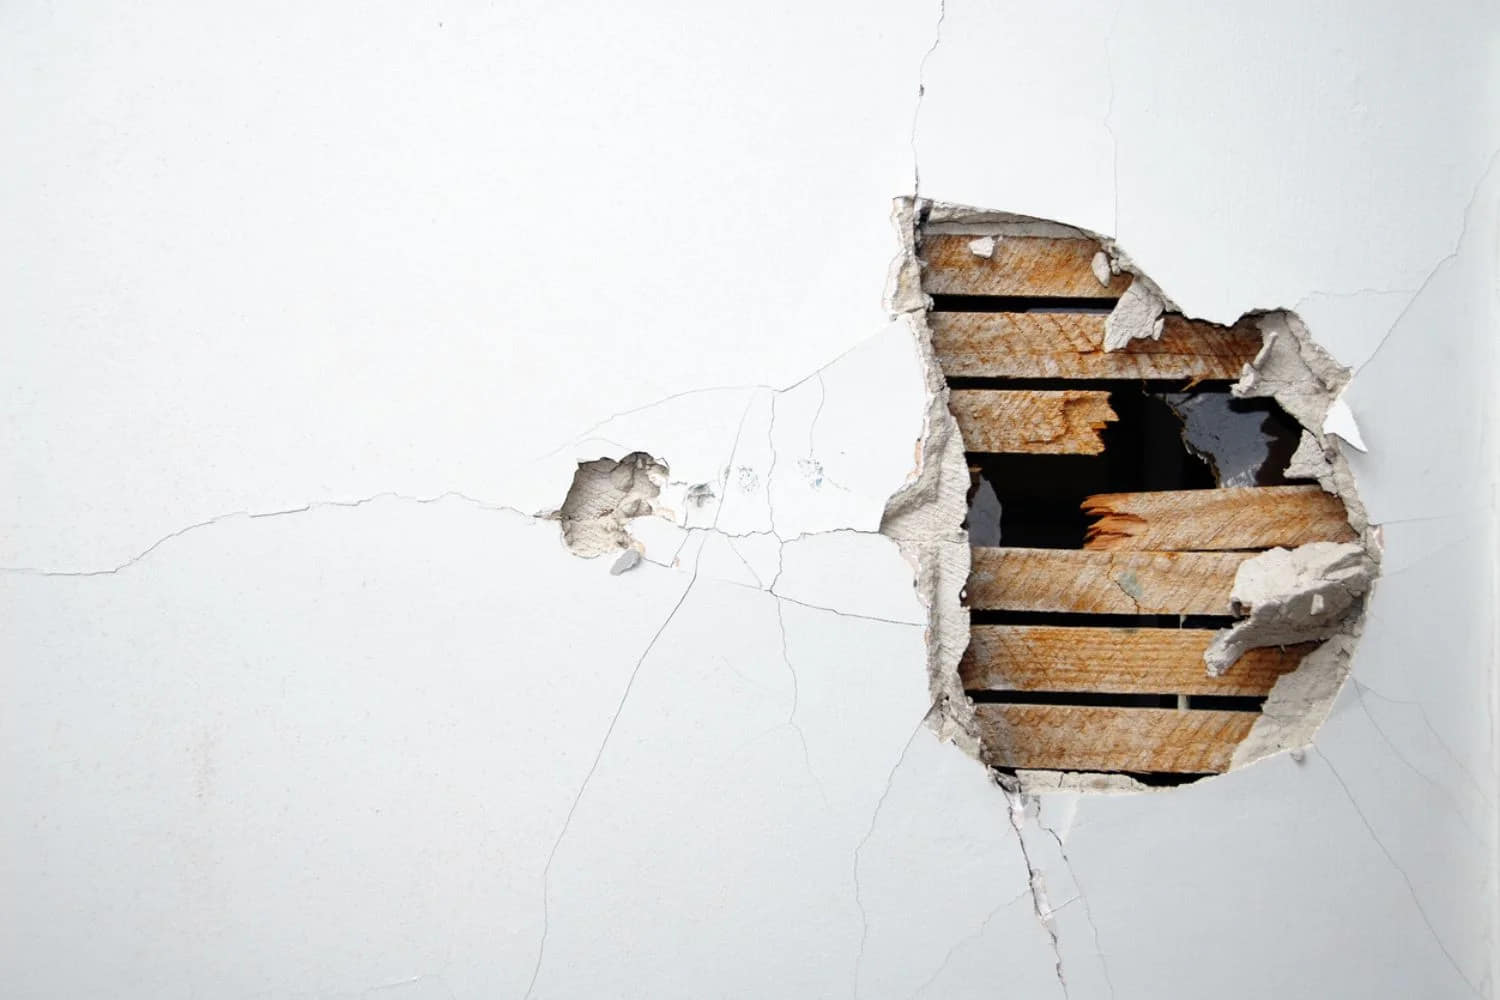 How Much Do Apartments Charge For Holes In Wall?